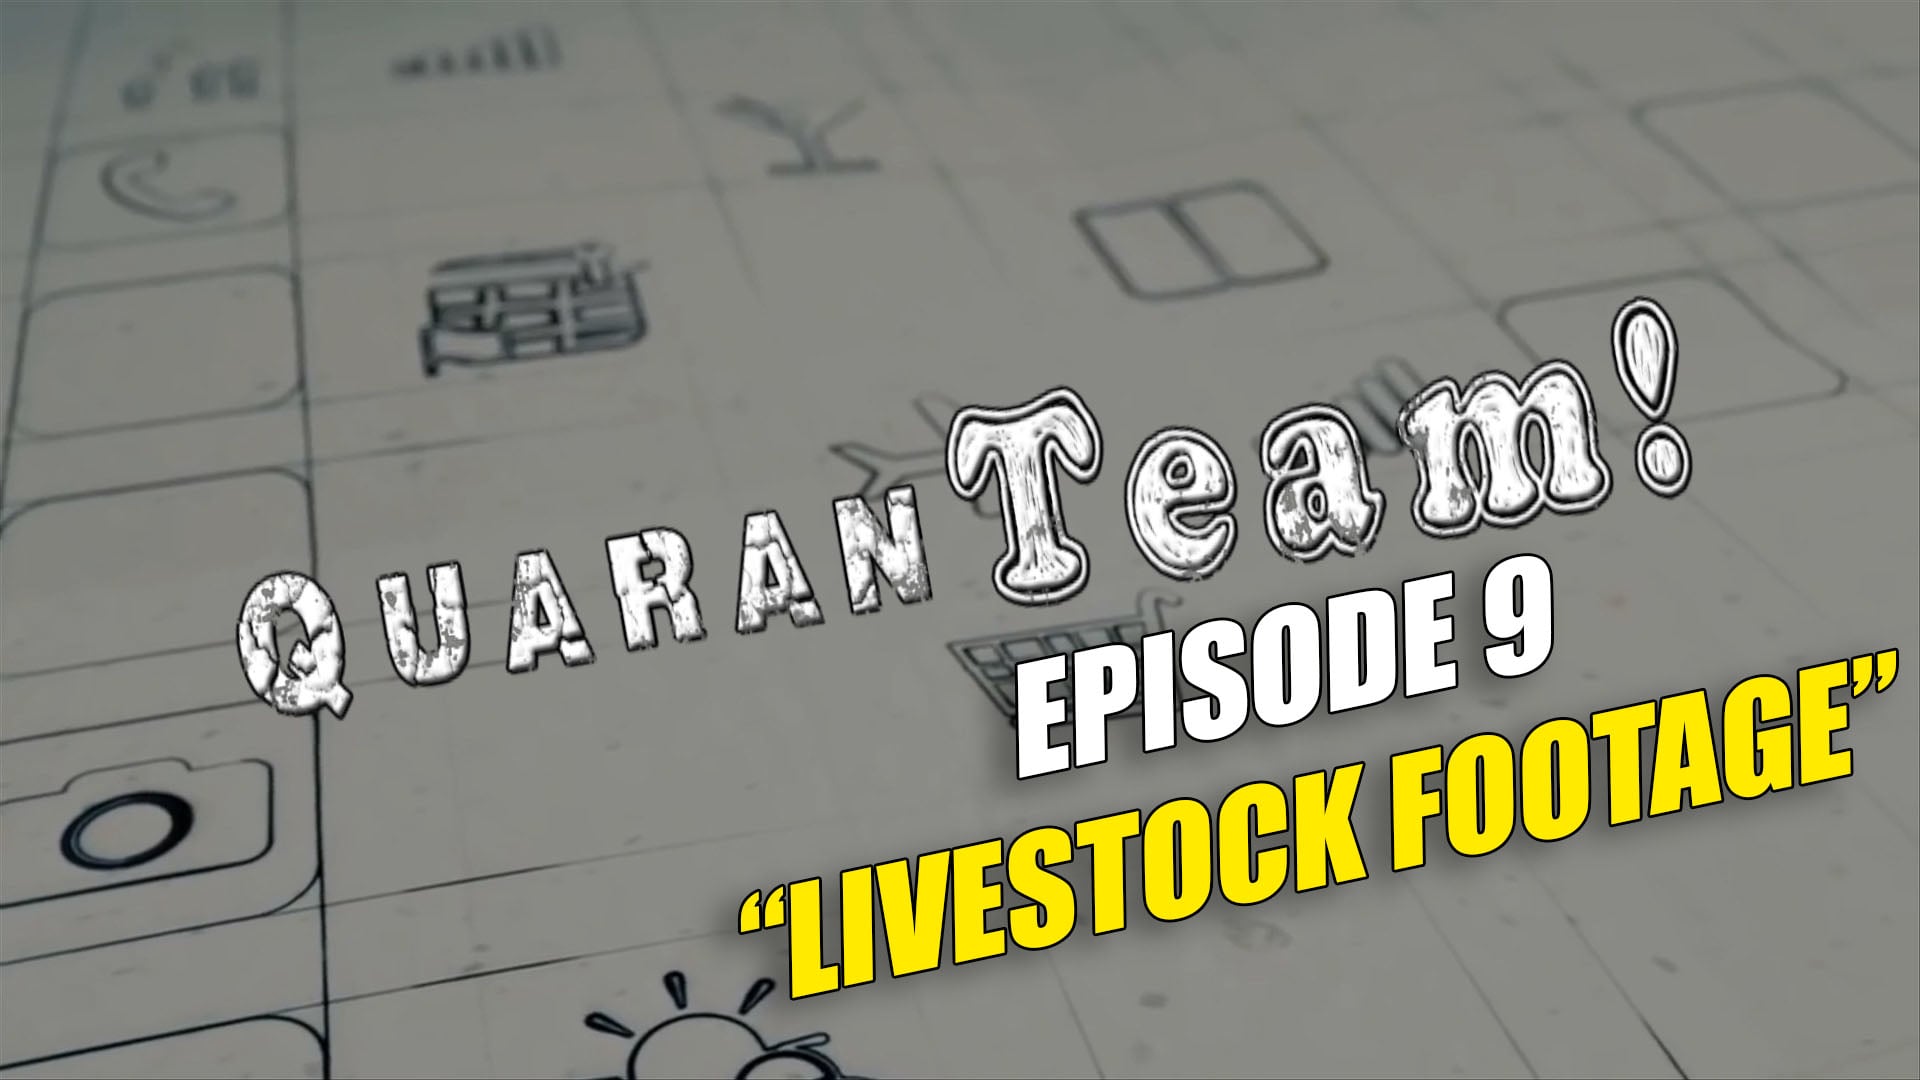 Watch QuaranTEAM! S1E09: Livestock Footage on our Free Roku Channel